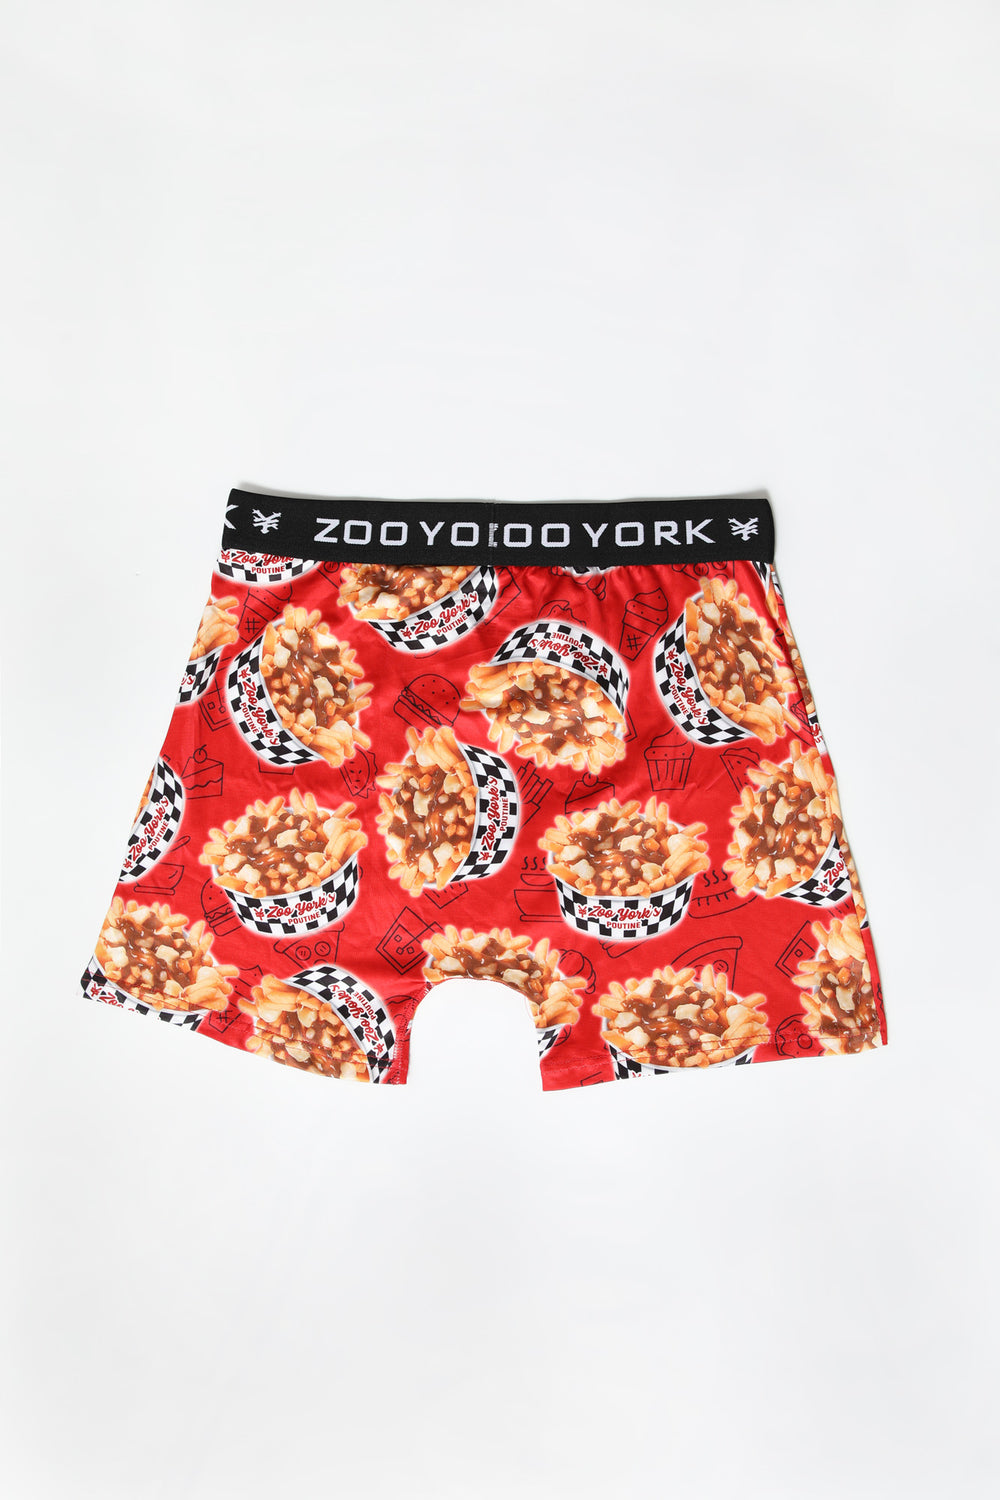 Zoo York Mens Poutine Boxer Brief Red